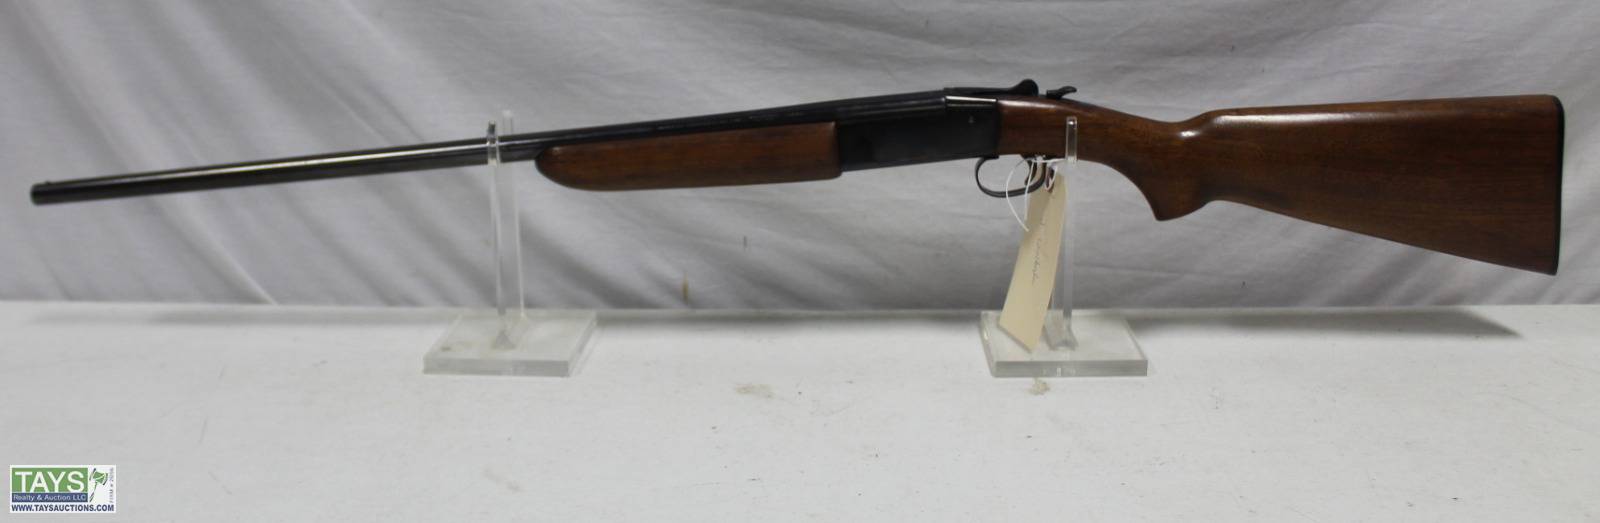 ONLINE ABSOLUTE AUCTION: FIREARMS - COINS - KNIVES - AMMO